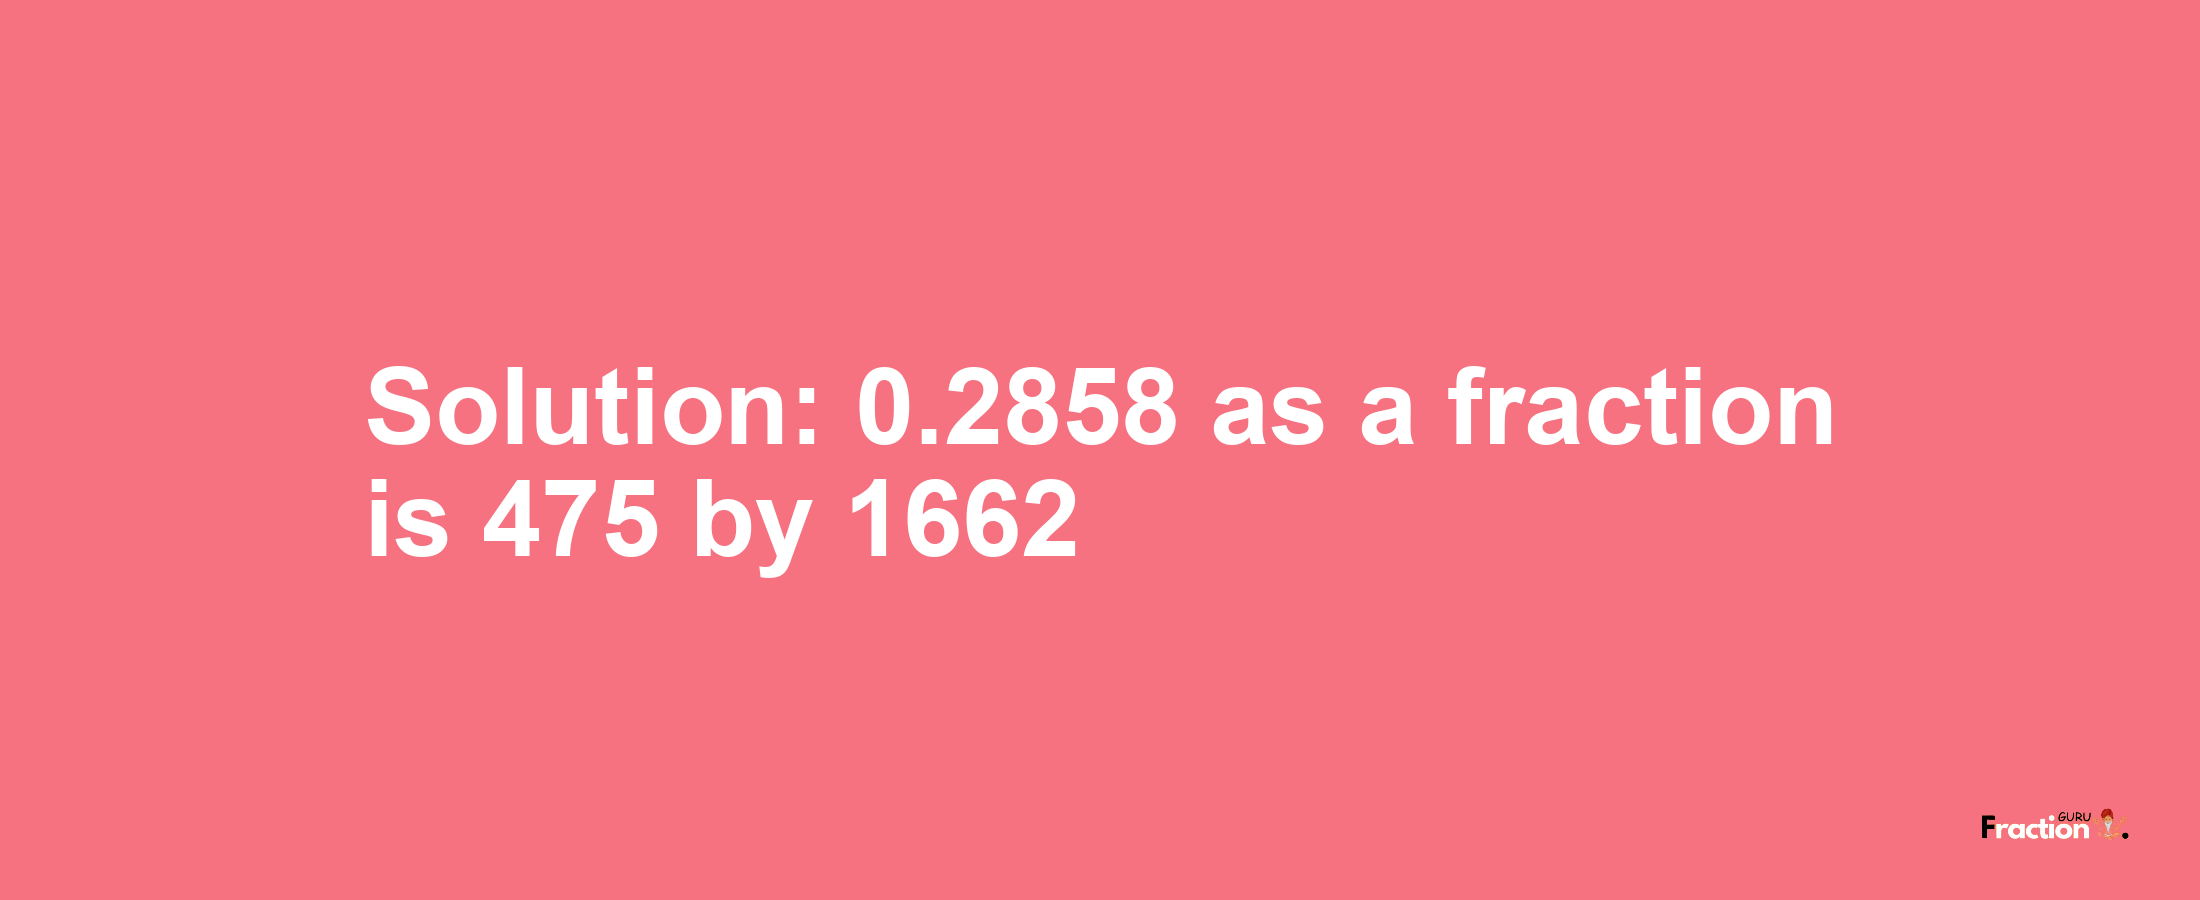 Solution:0.2858 as a fraction is 475/1662